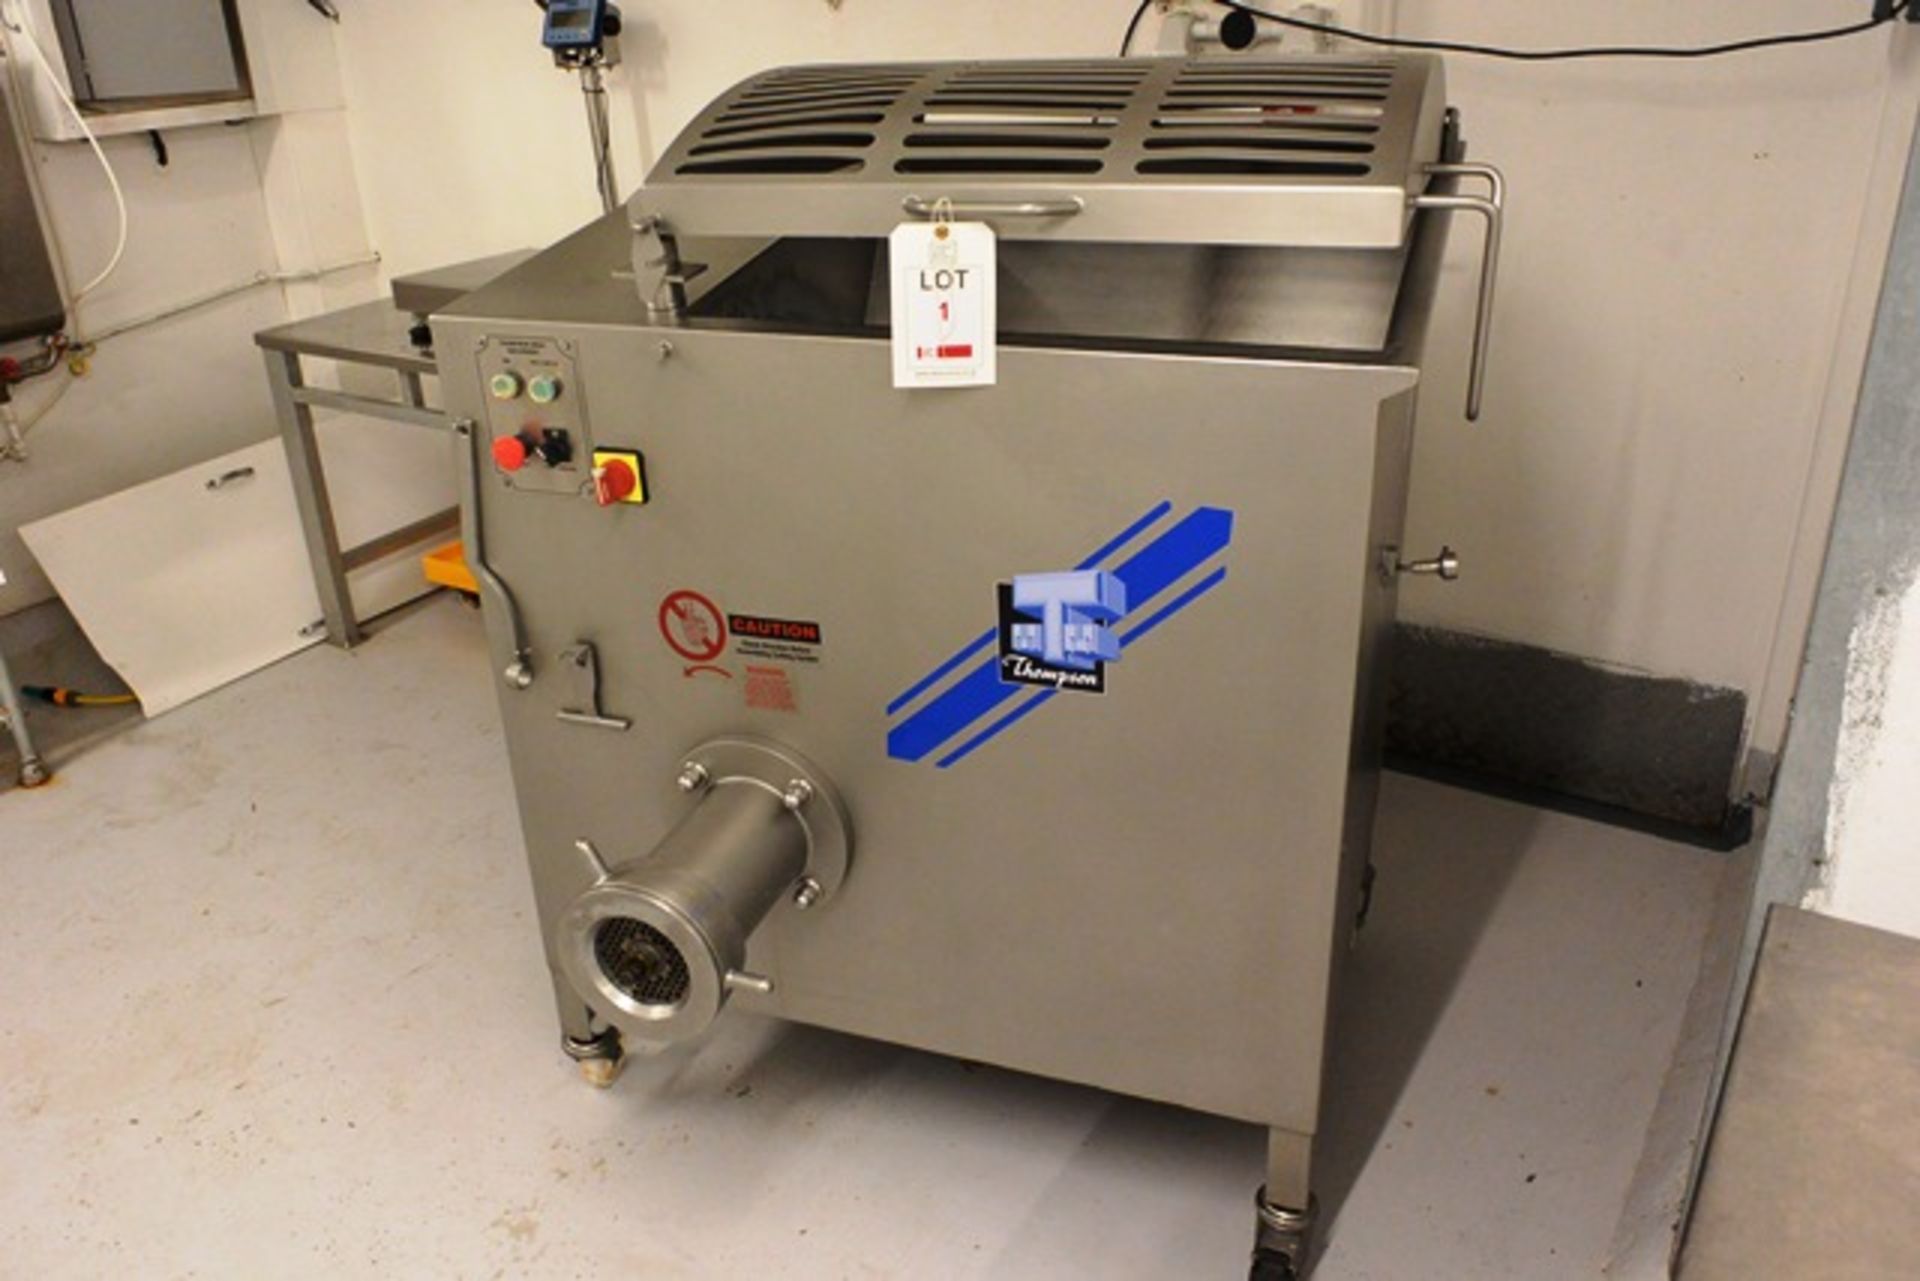 Thompson 3000 stainless steel meat grinder, serial no: 3000 M12.64 (2014), 3 phase, mounted on - Image 2 of 5